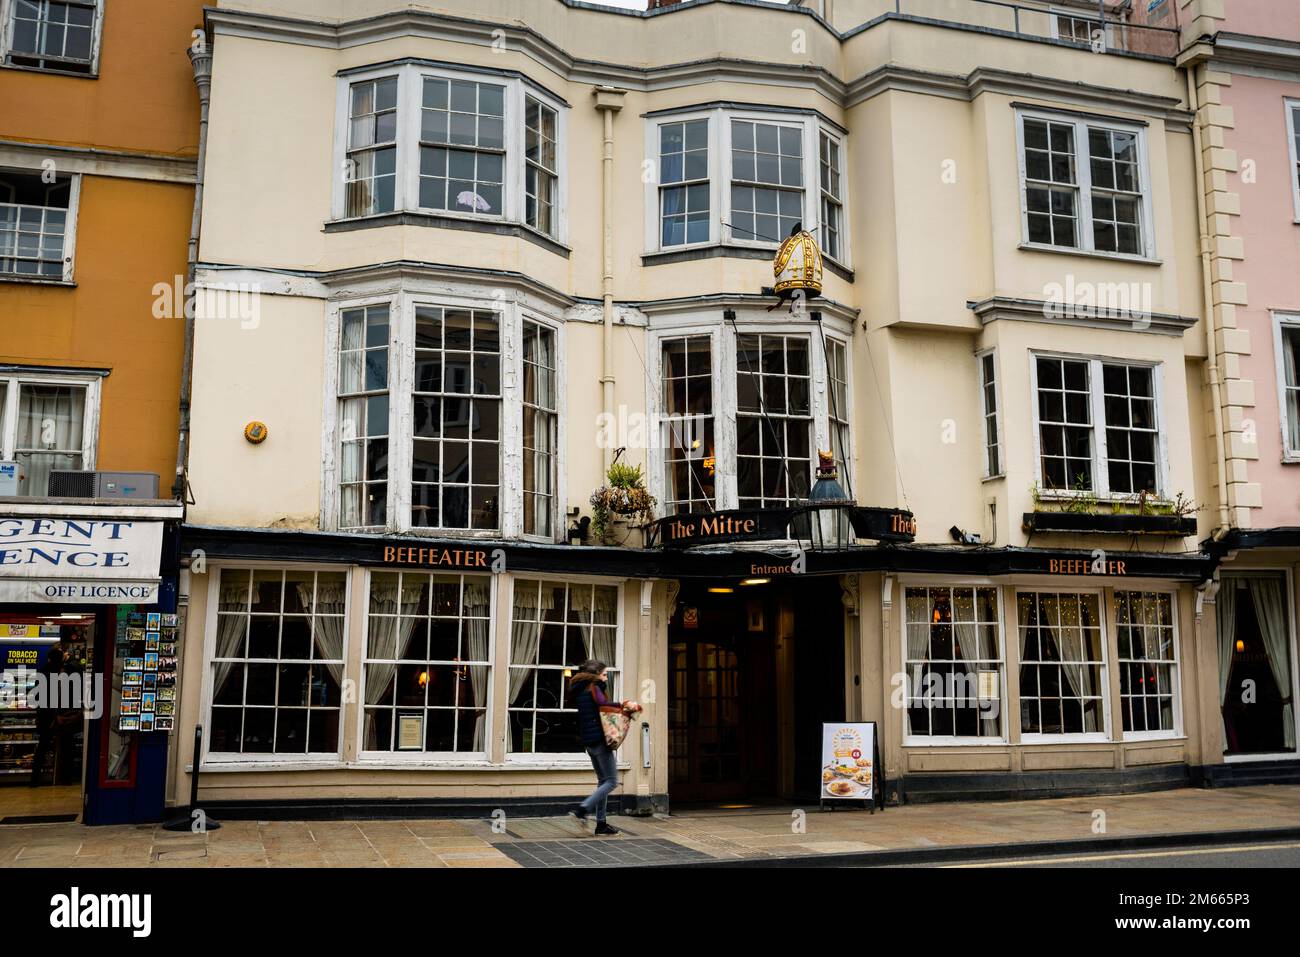 Former coaching inn The Mitre in Oxford, England. Stock Photo